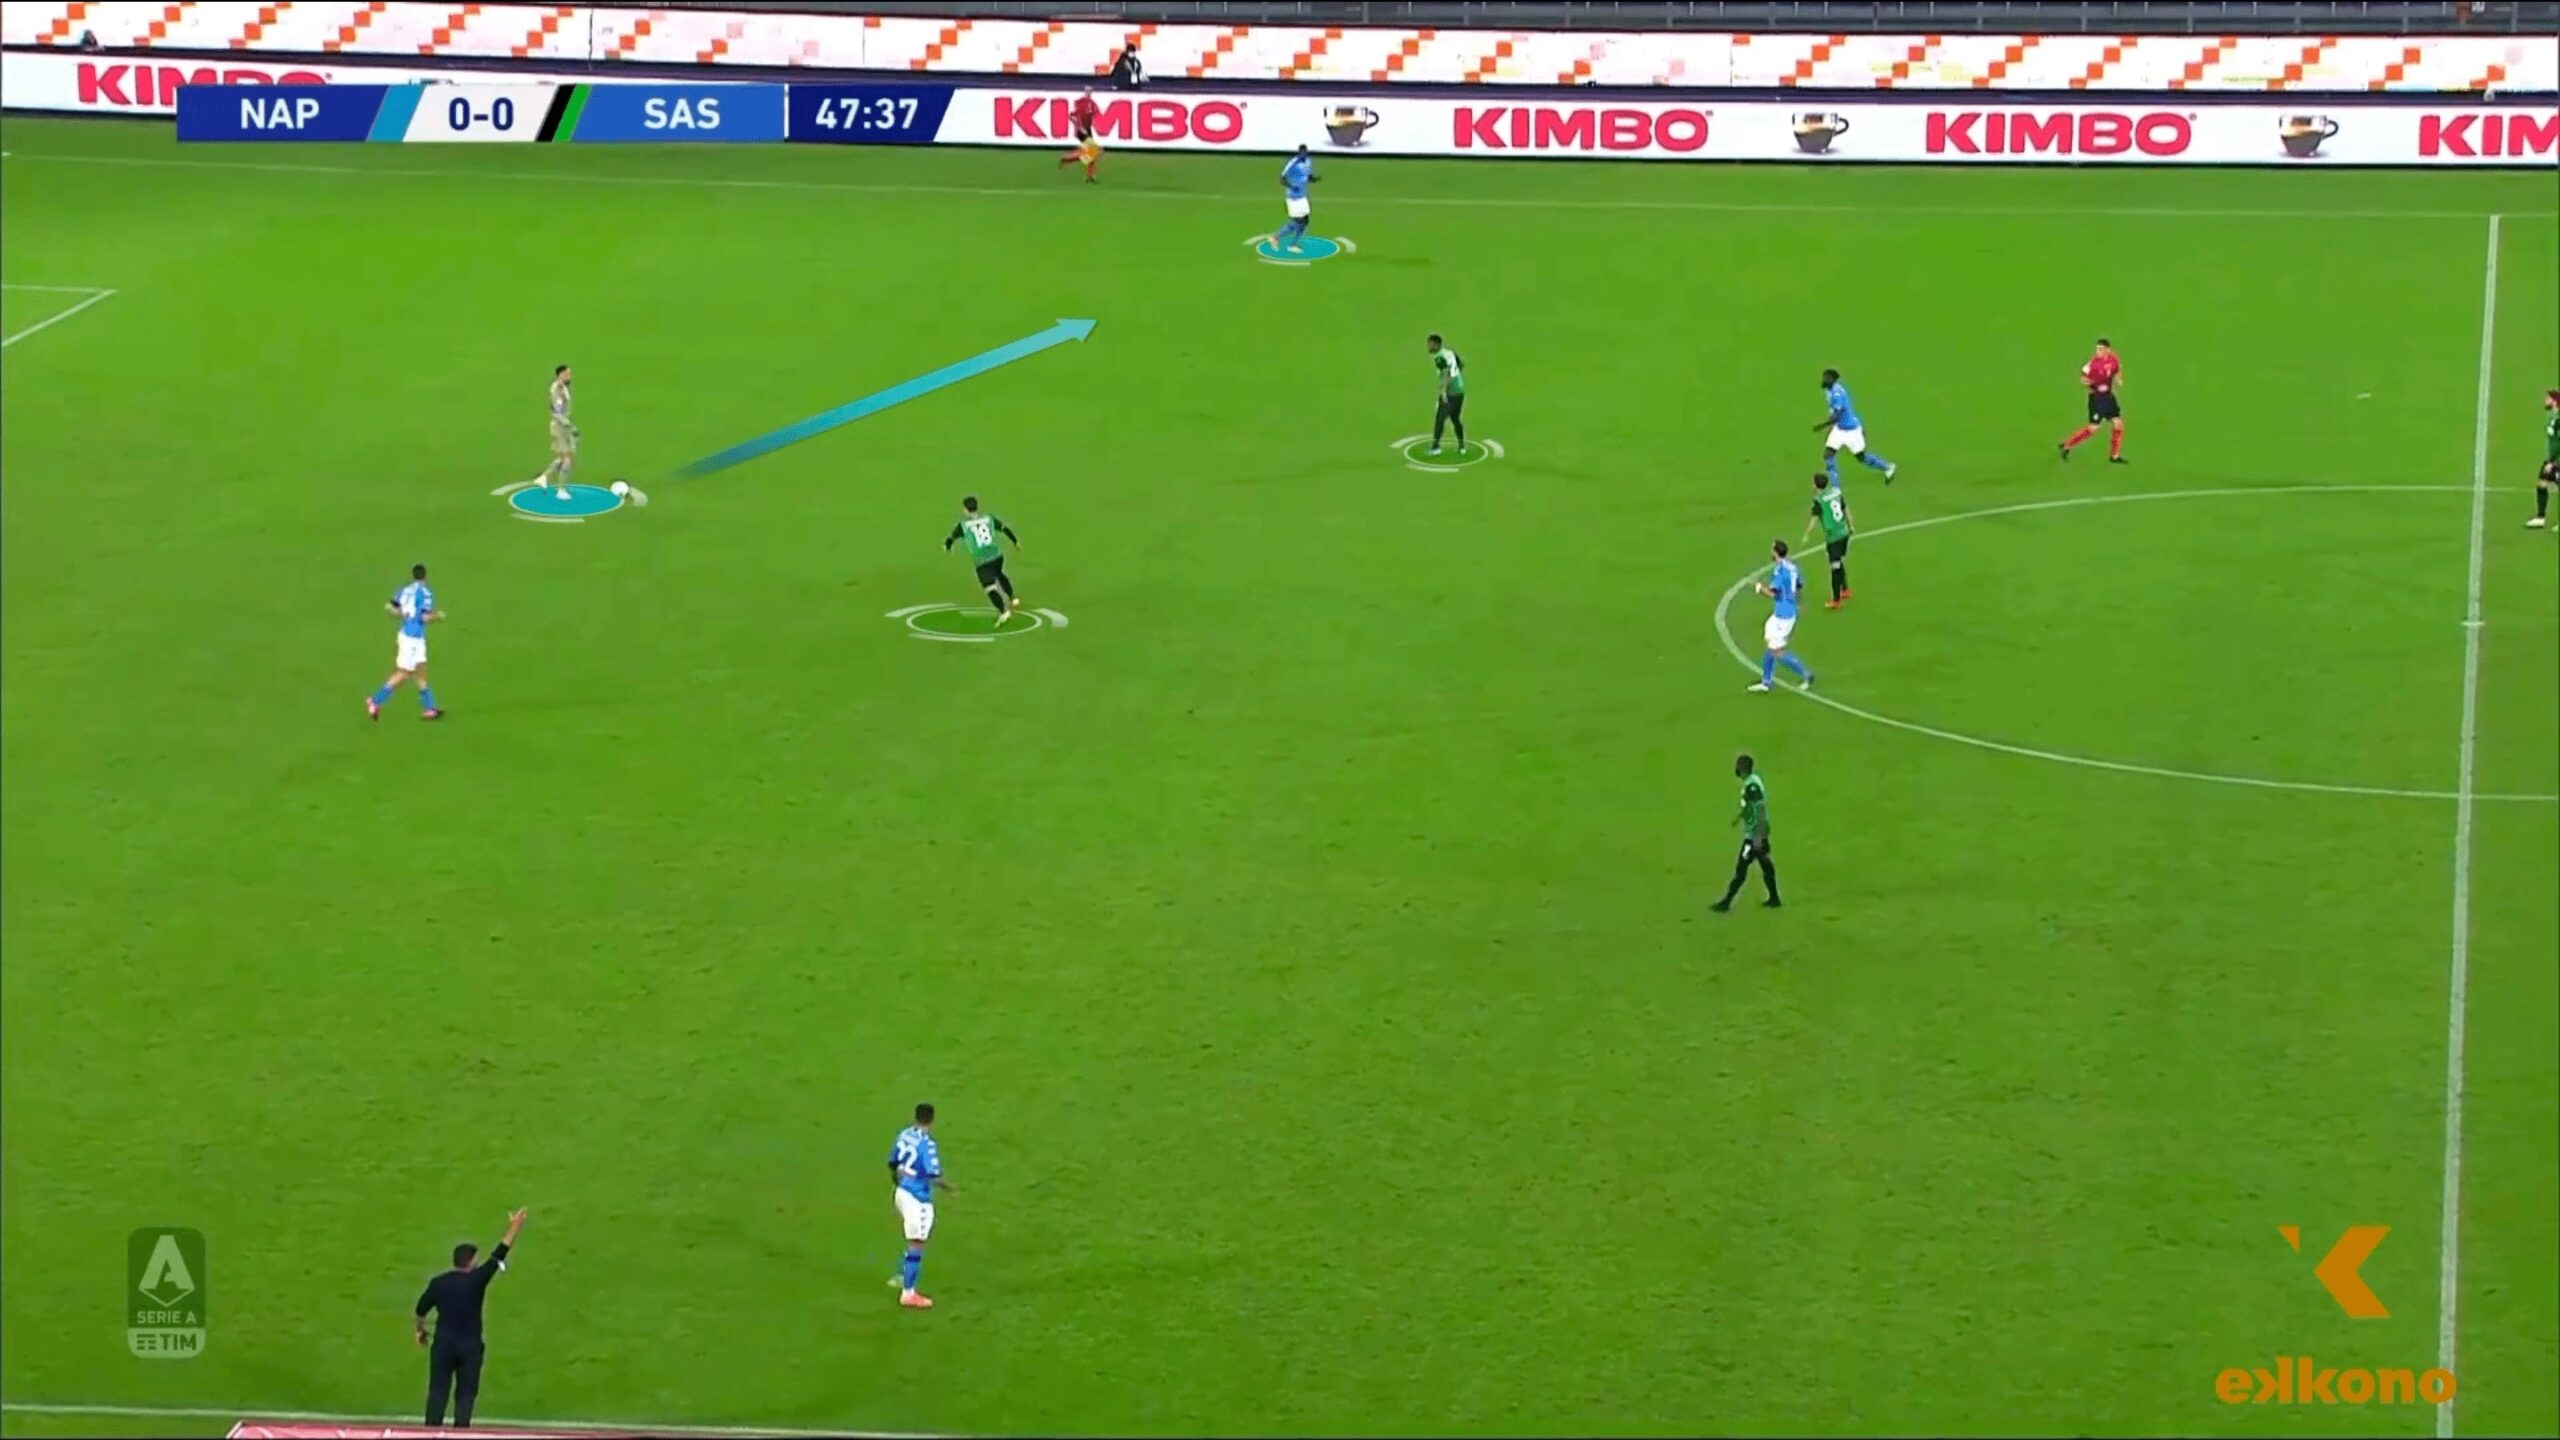 Ospina progresses with the ball and gain time. It gives Koulibaly a chance to relocate and find a better attacking position.